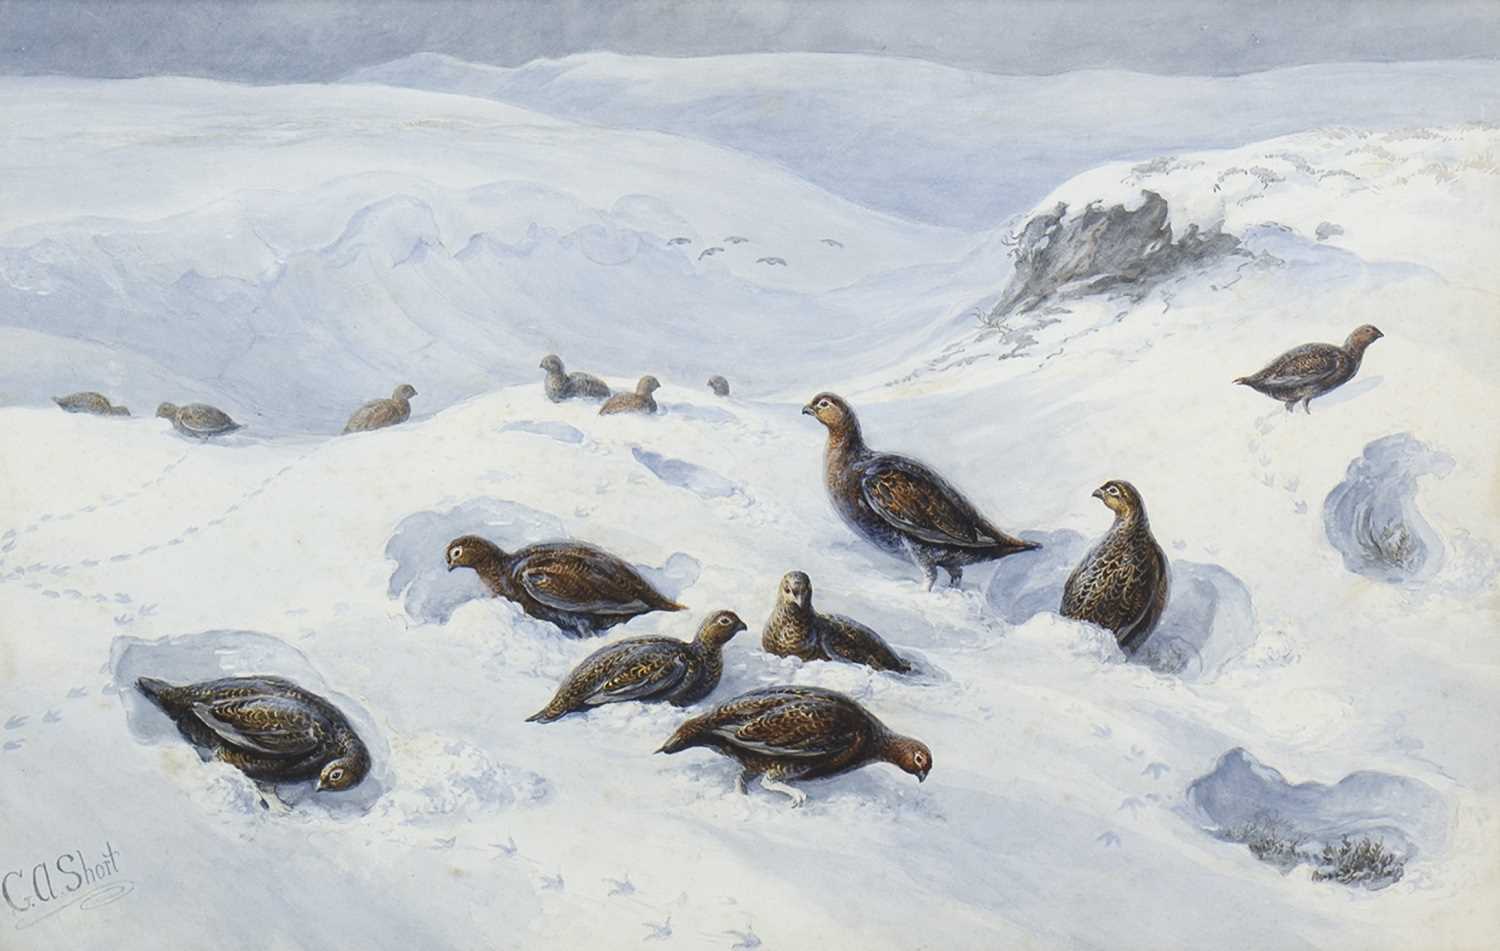 Lot 414 - A HARD WINTER FOR THE GROUSE, A WATERCOLOUR BY GEORGE ANDERSON SHORT